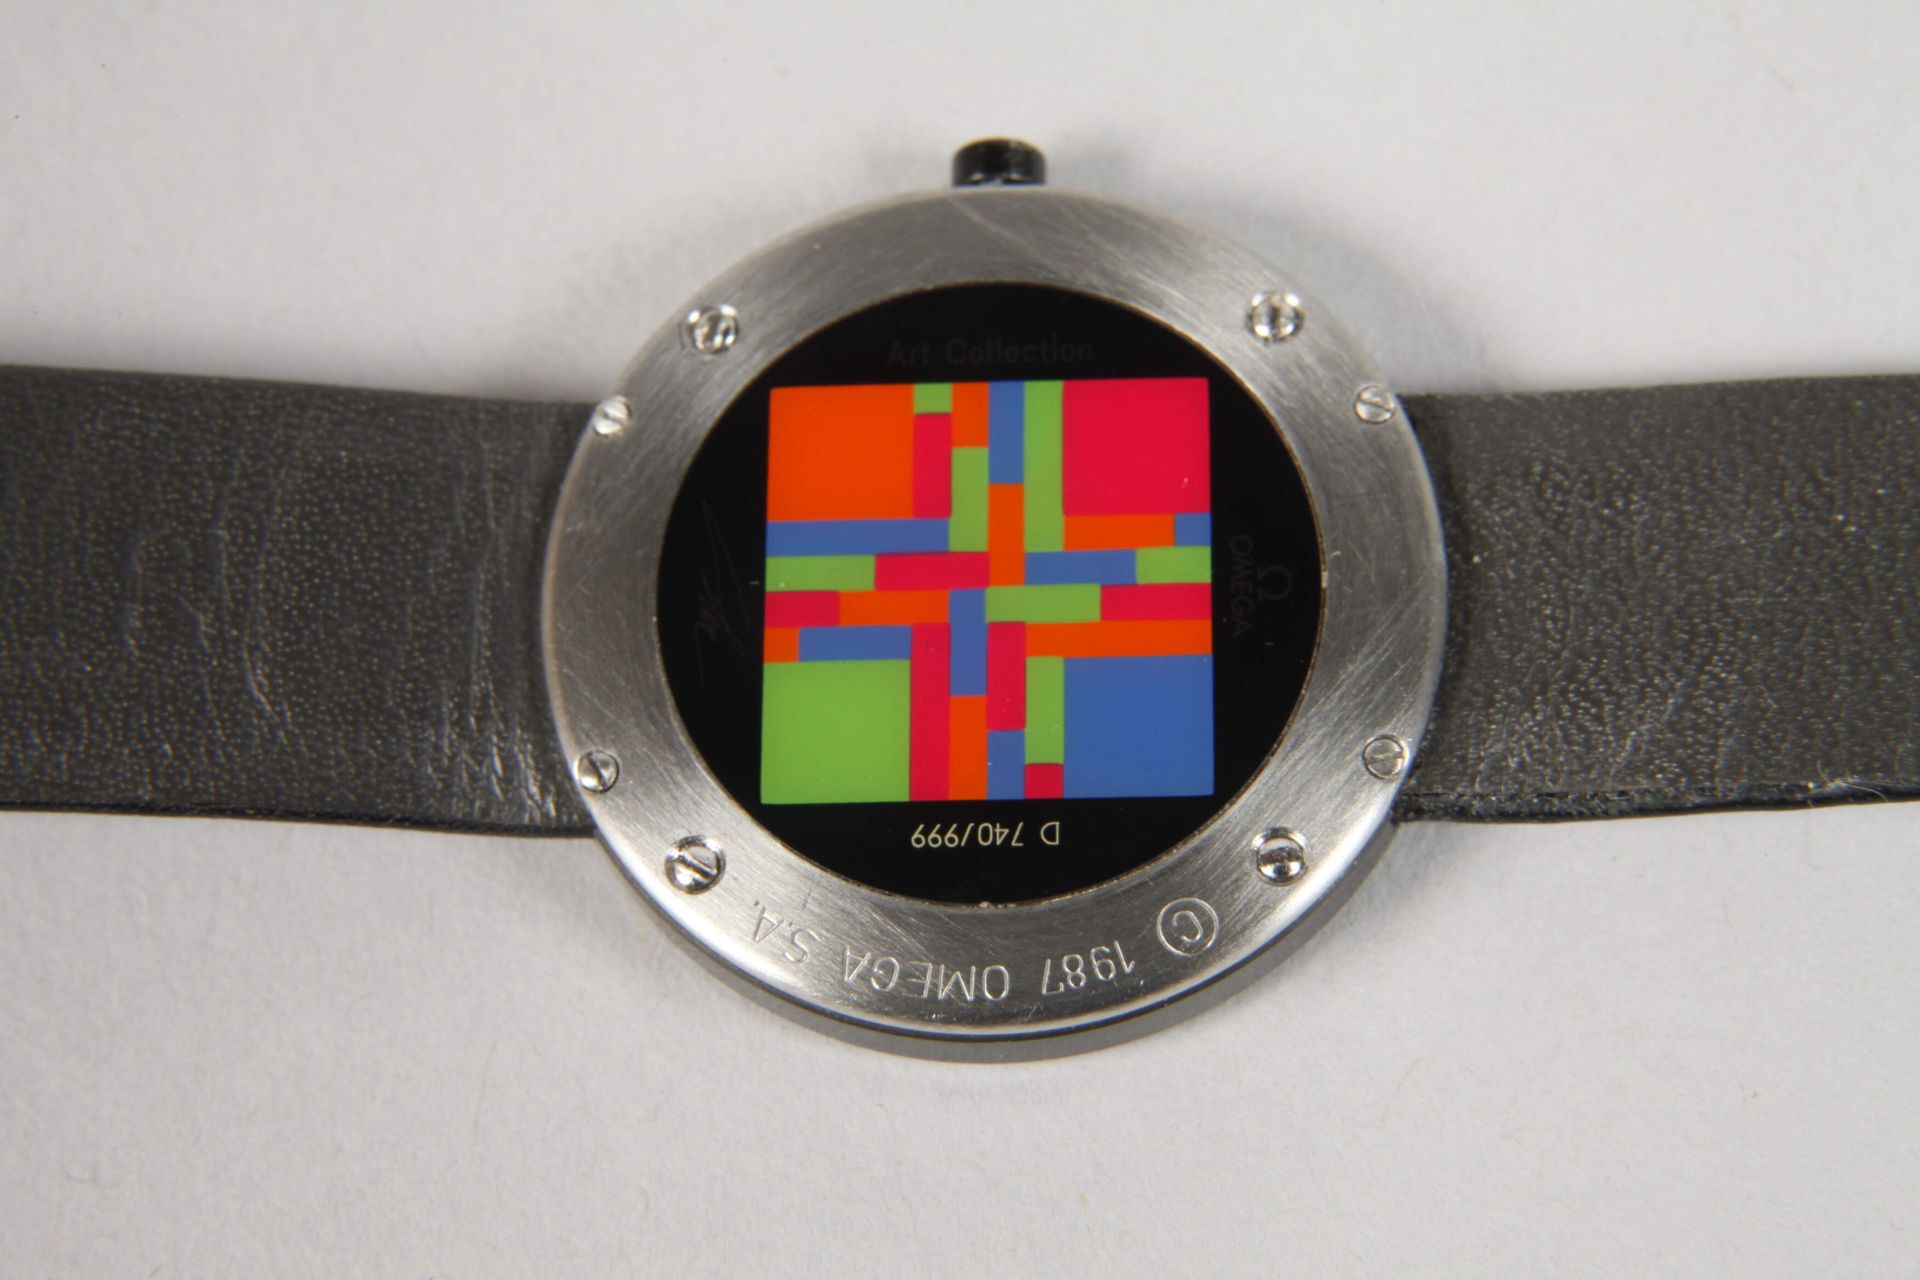 Wristwatch Omega "ART COLLECTION" - Image 3 of 4